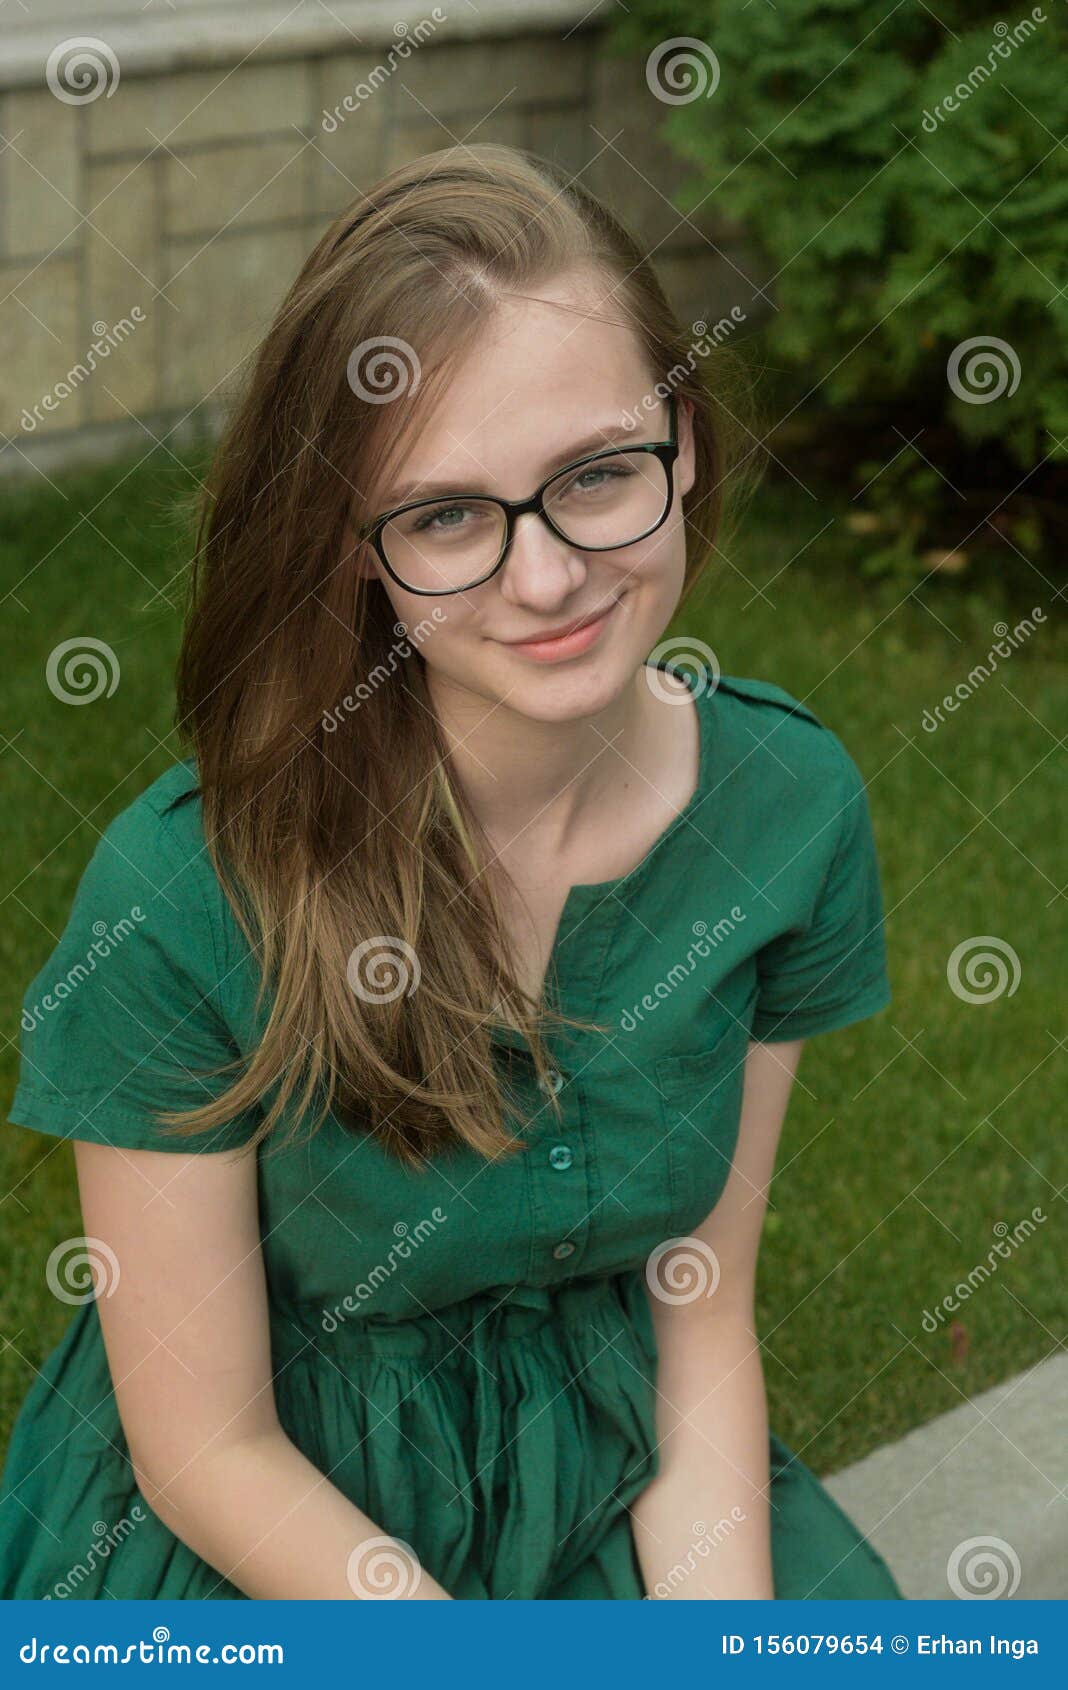 Portrait Of Cute Young Girl With Eyeglasses Smiling B